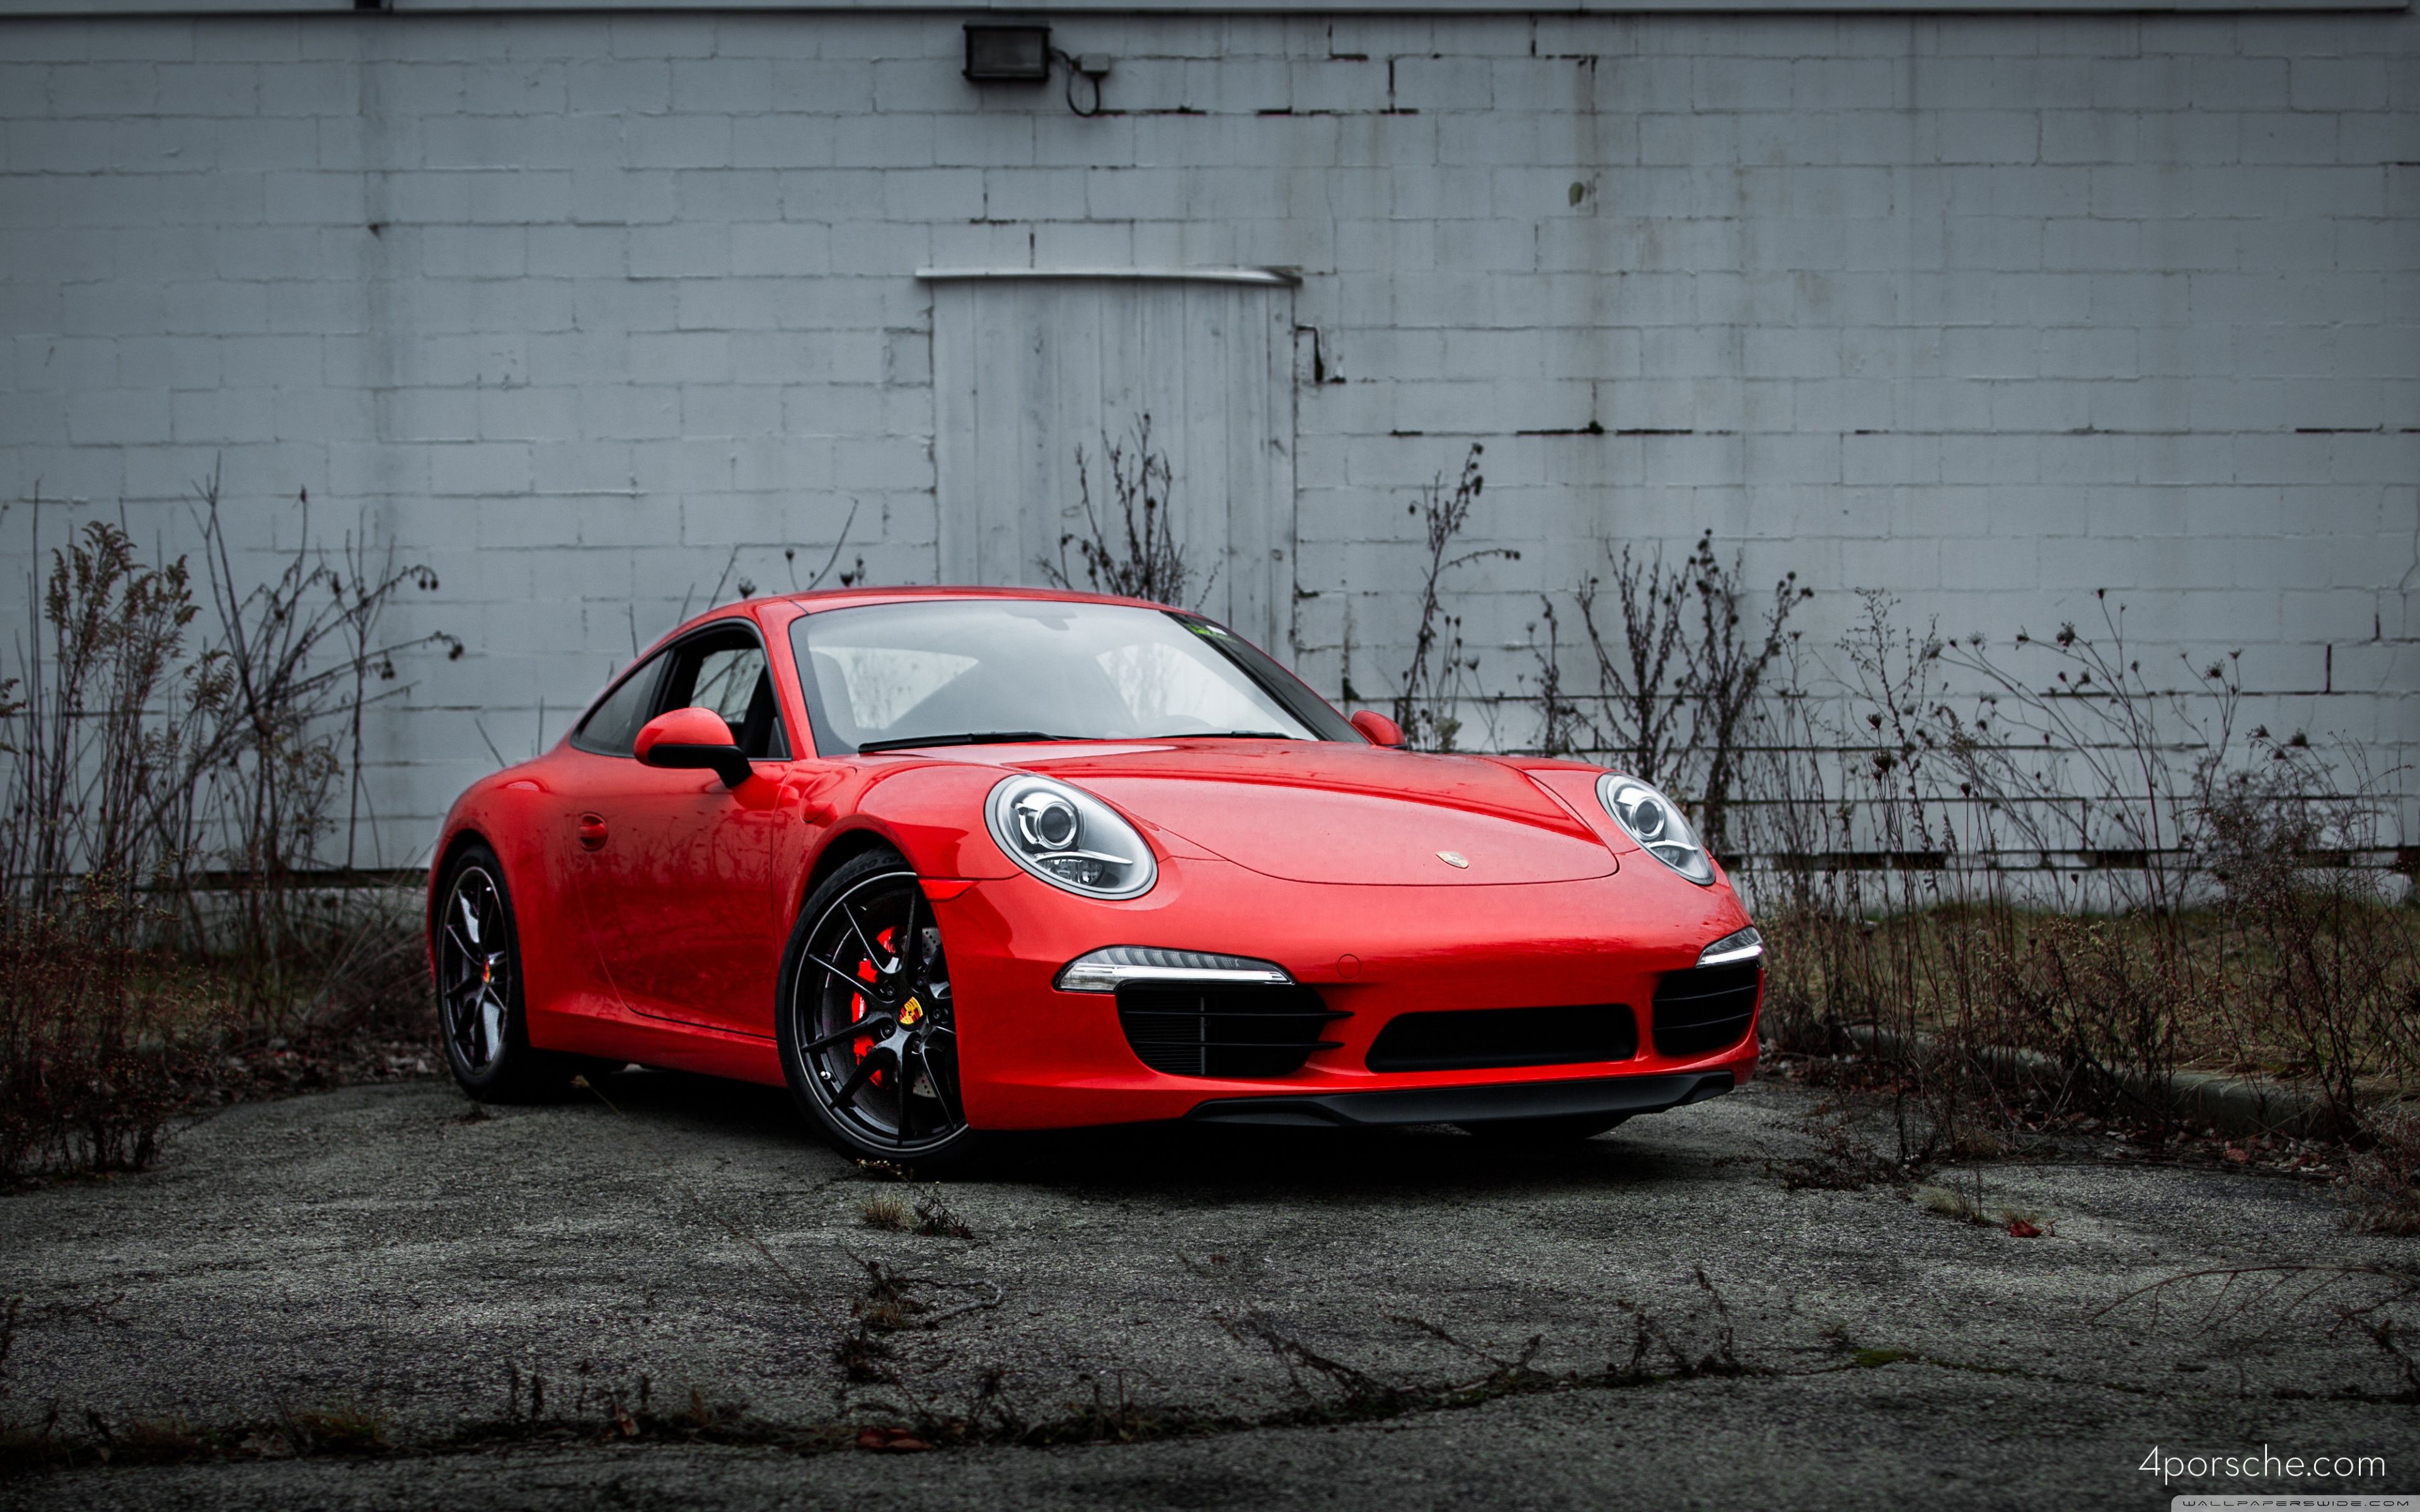 Red 2013 Porsche 911 991 Carrera S with black wheels, brought to